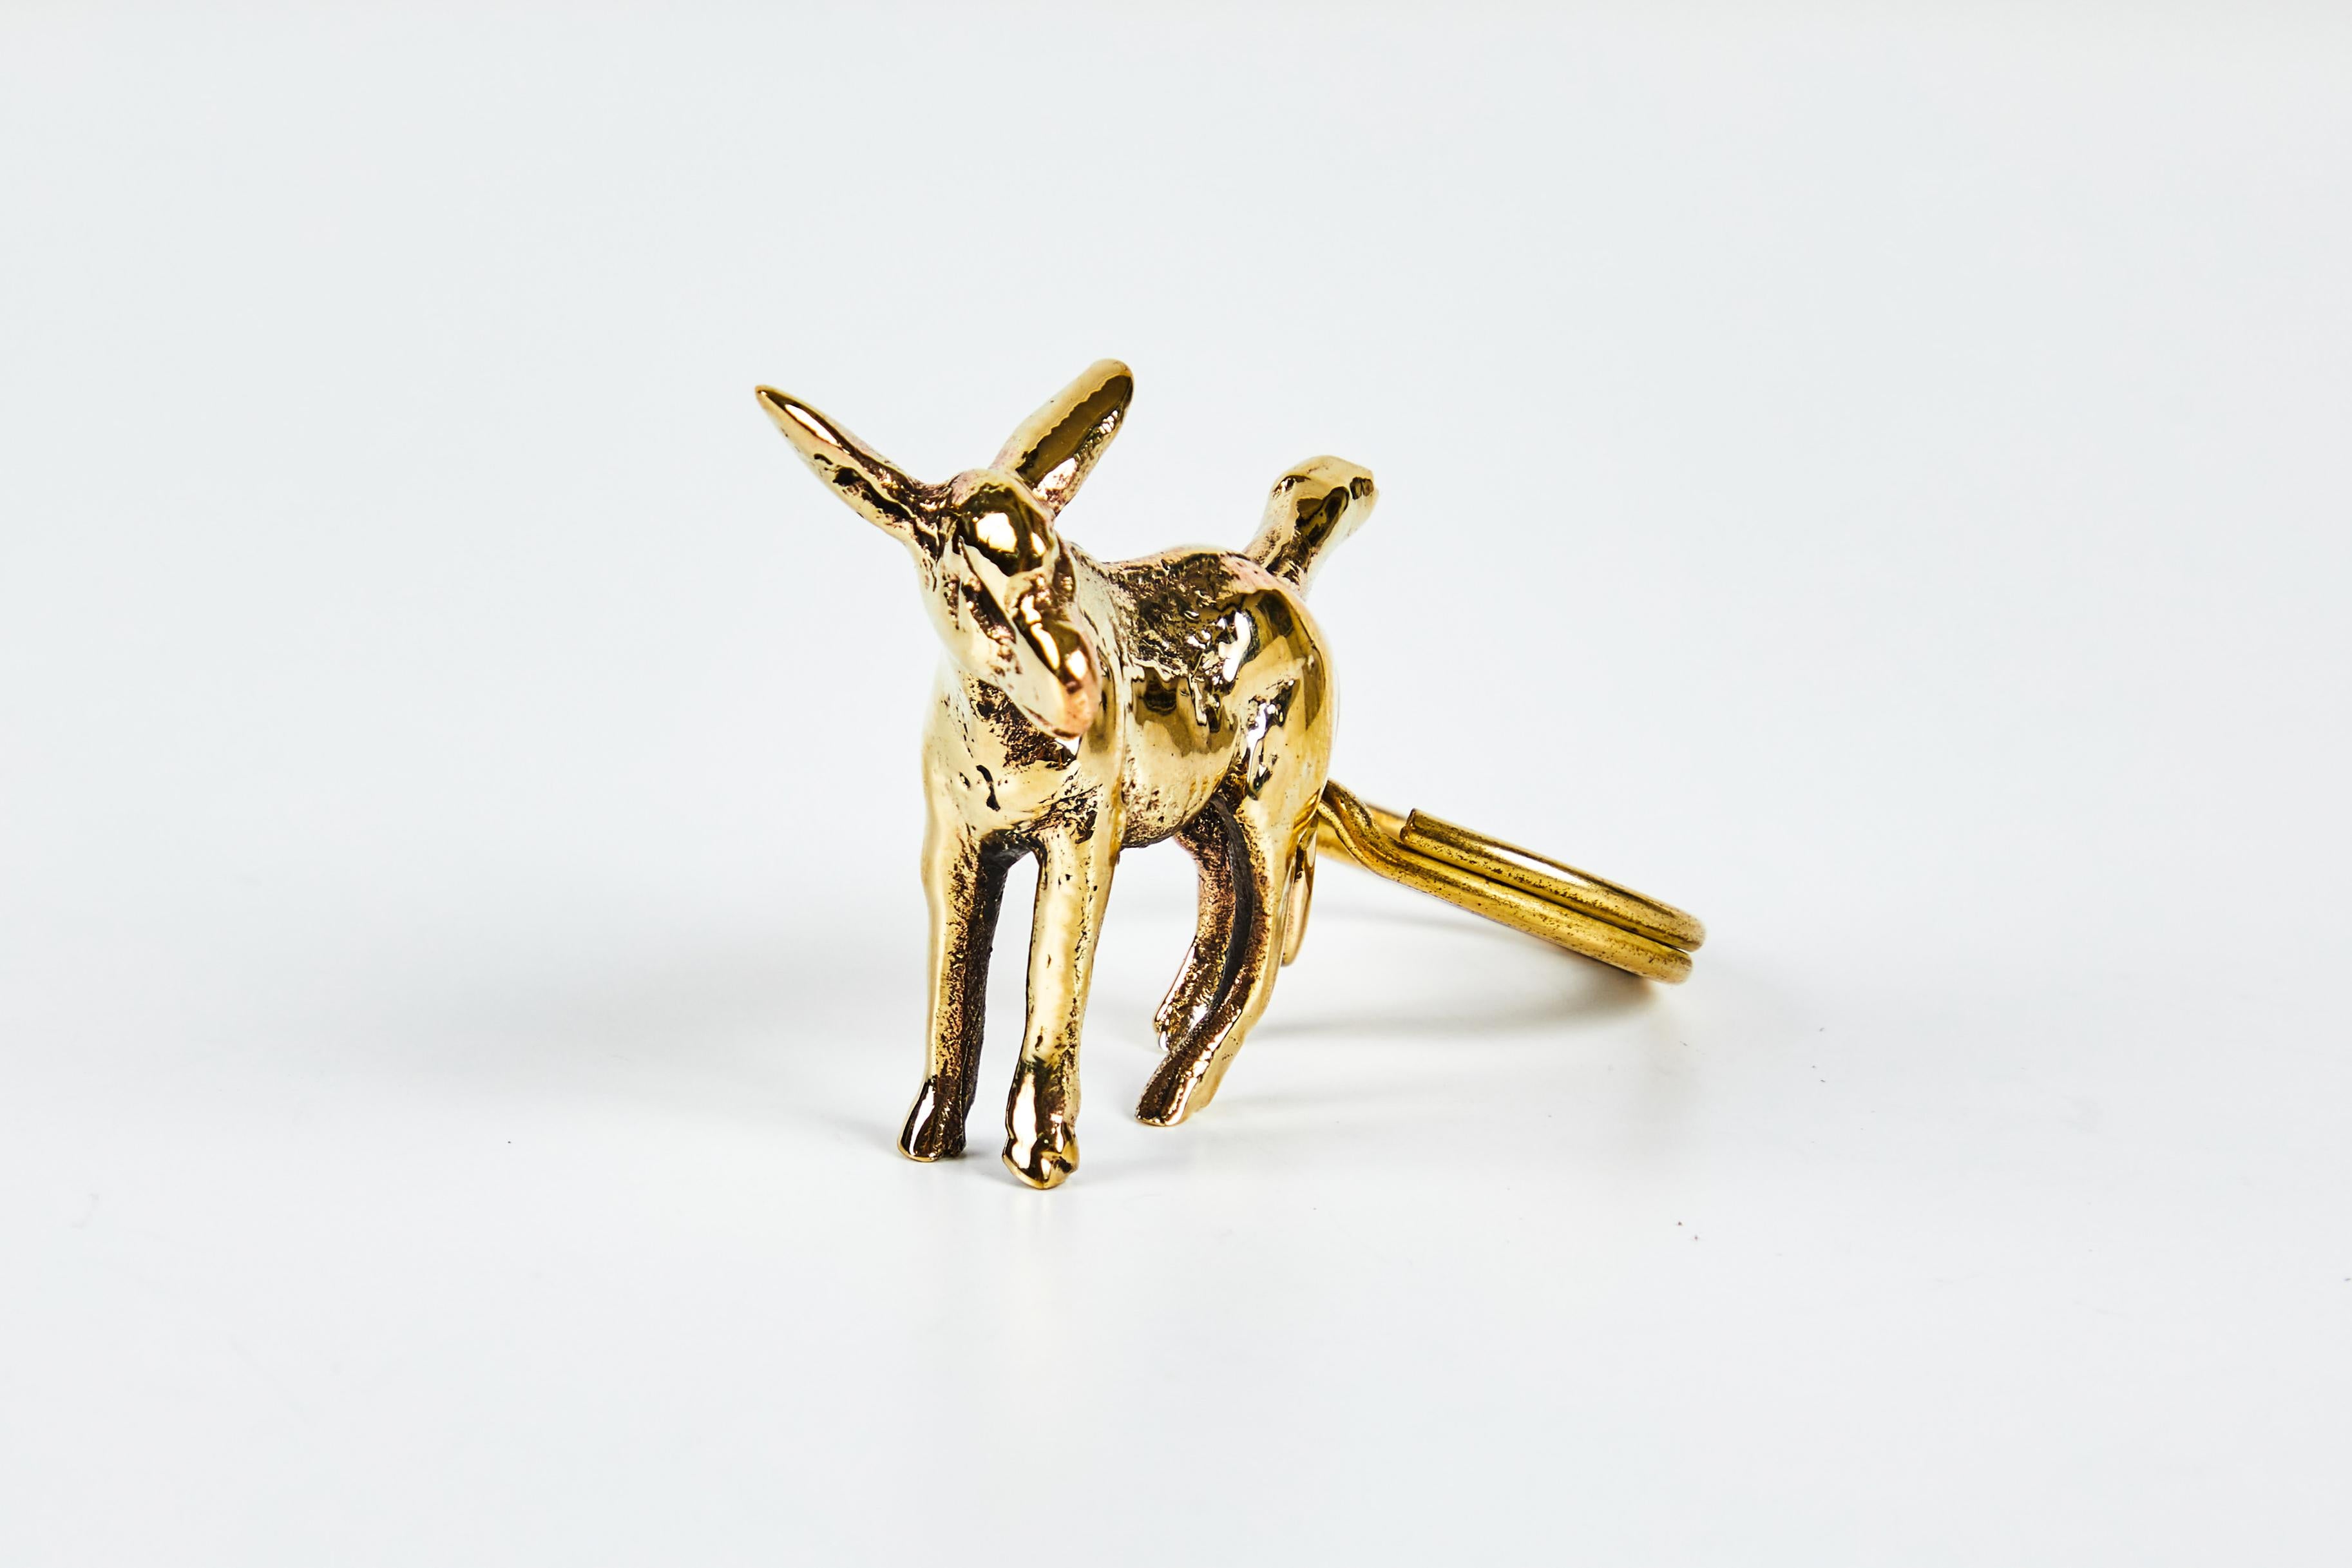 Carl Auböck model #5608 'Donkey' brass figurine keyring. Designed in the 1950s, this incredibly refined and sculptural object is hand fabricated in polished brass. 

Price is per item. One in stock ready to ship. Available in unlimited quantities.